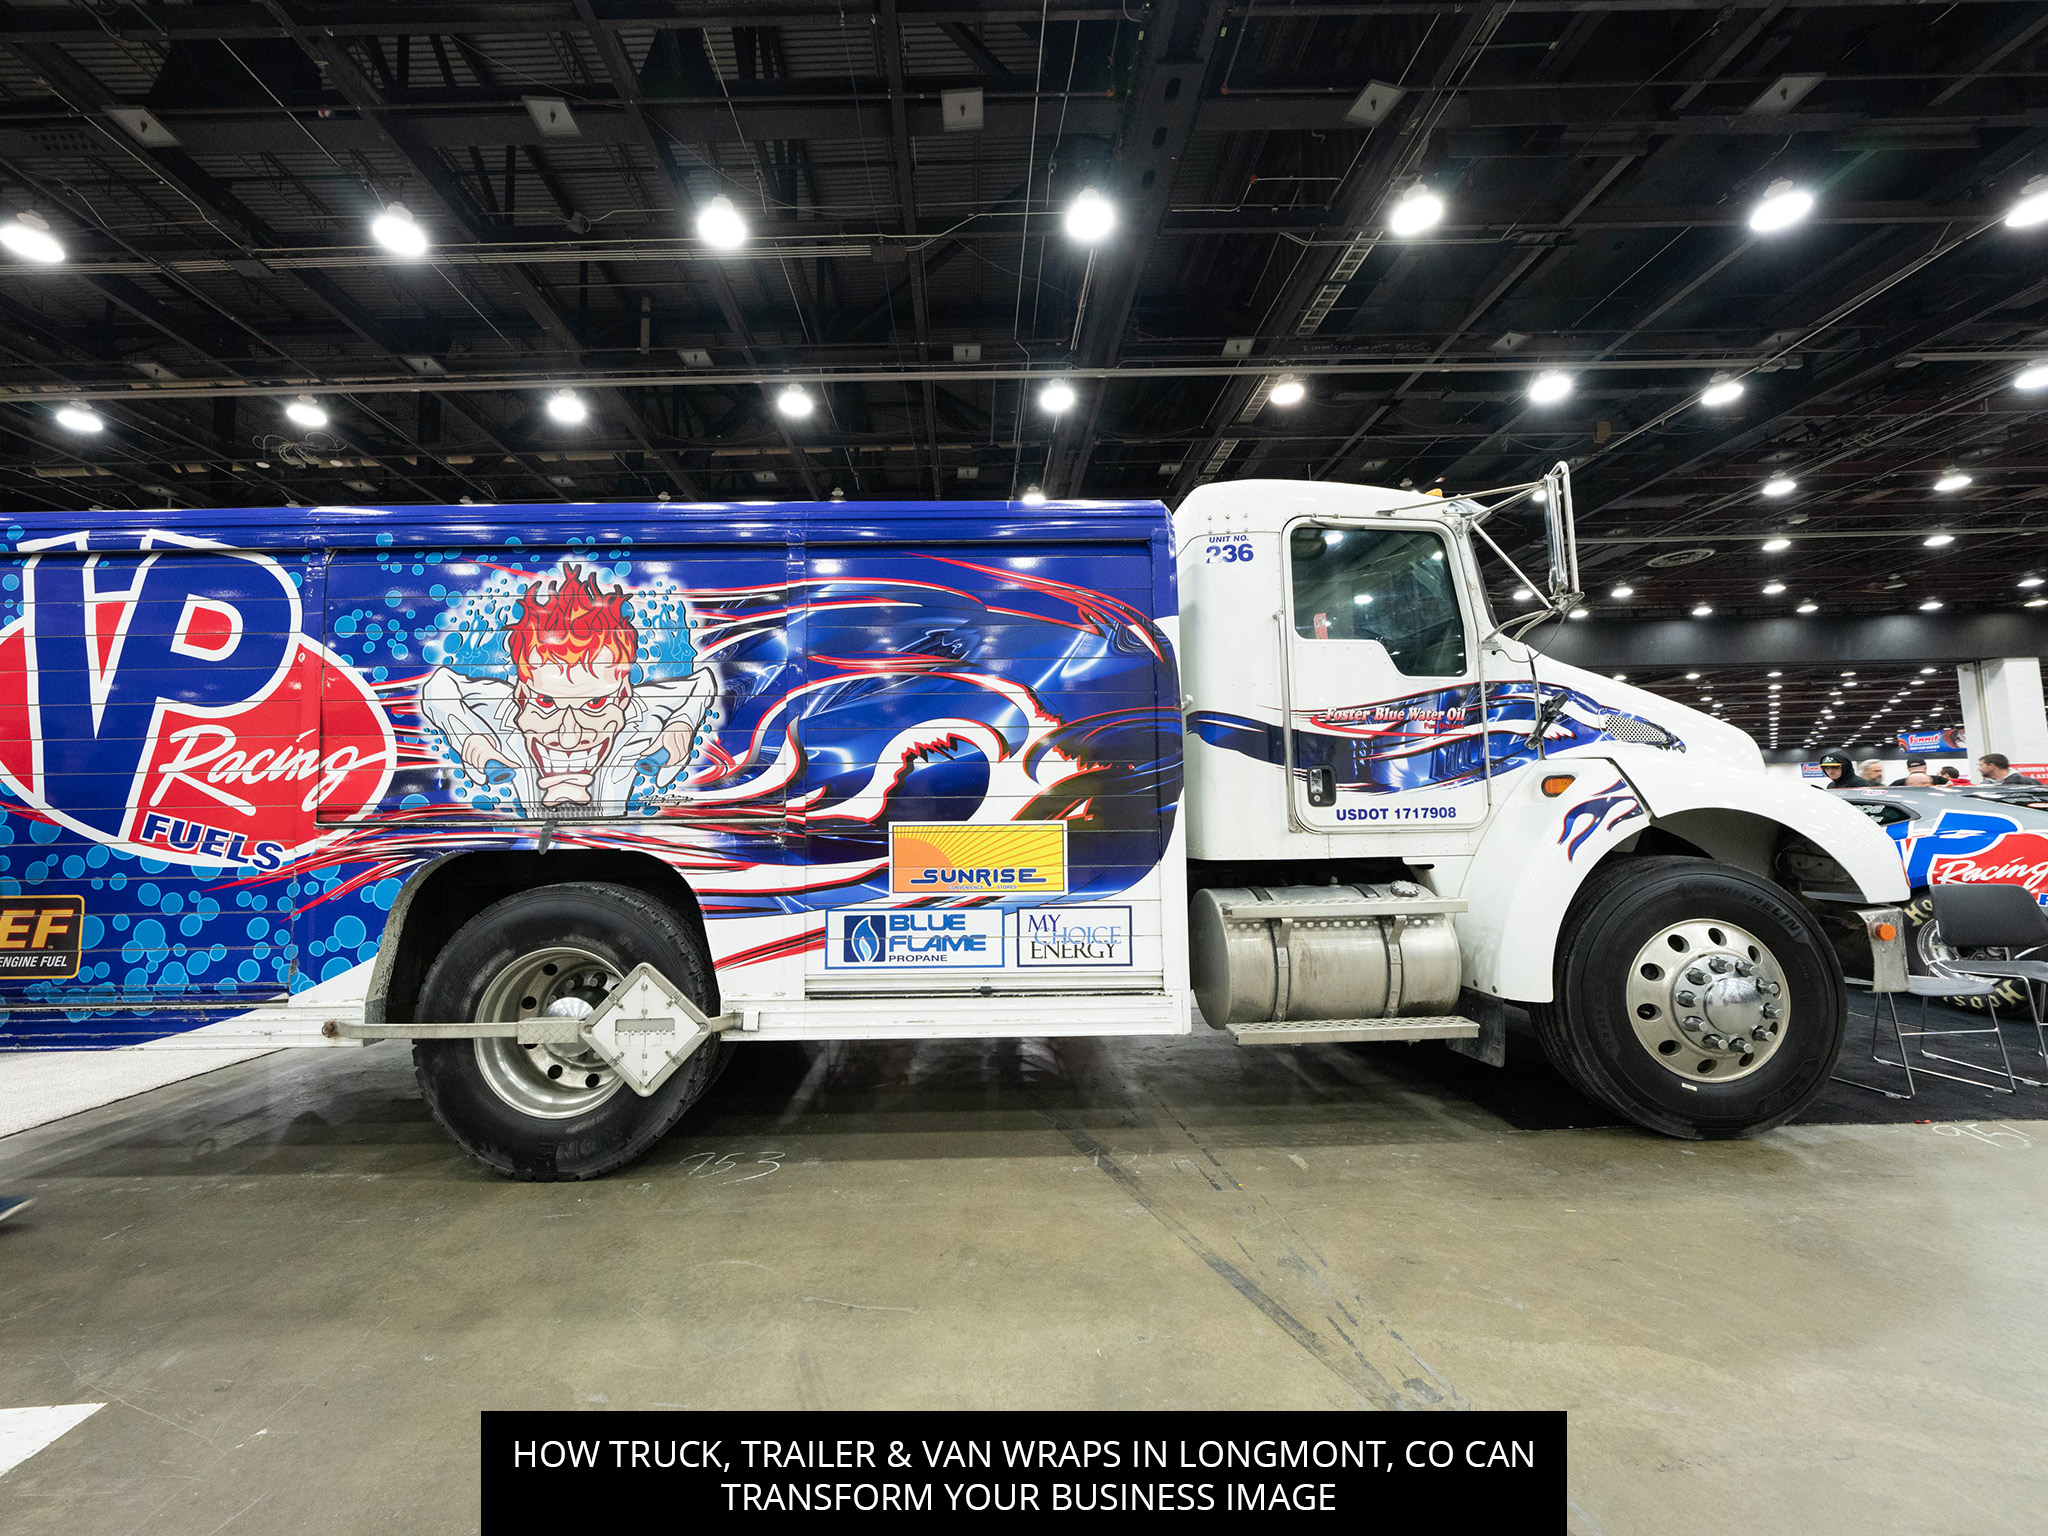 How Truck, Trailer & Van Wraps in Longmont, CO Can Transform Your Business Image